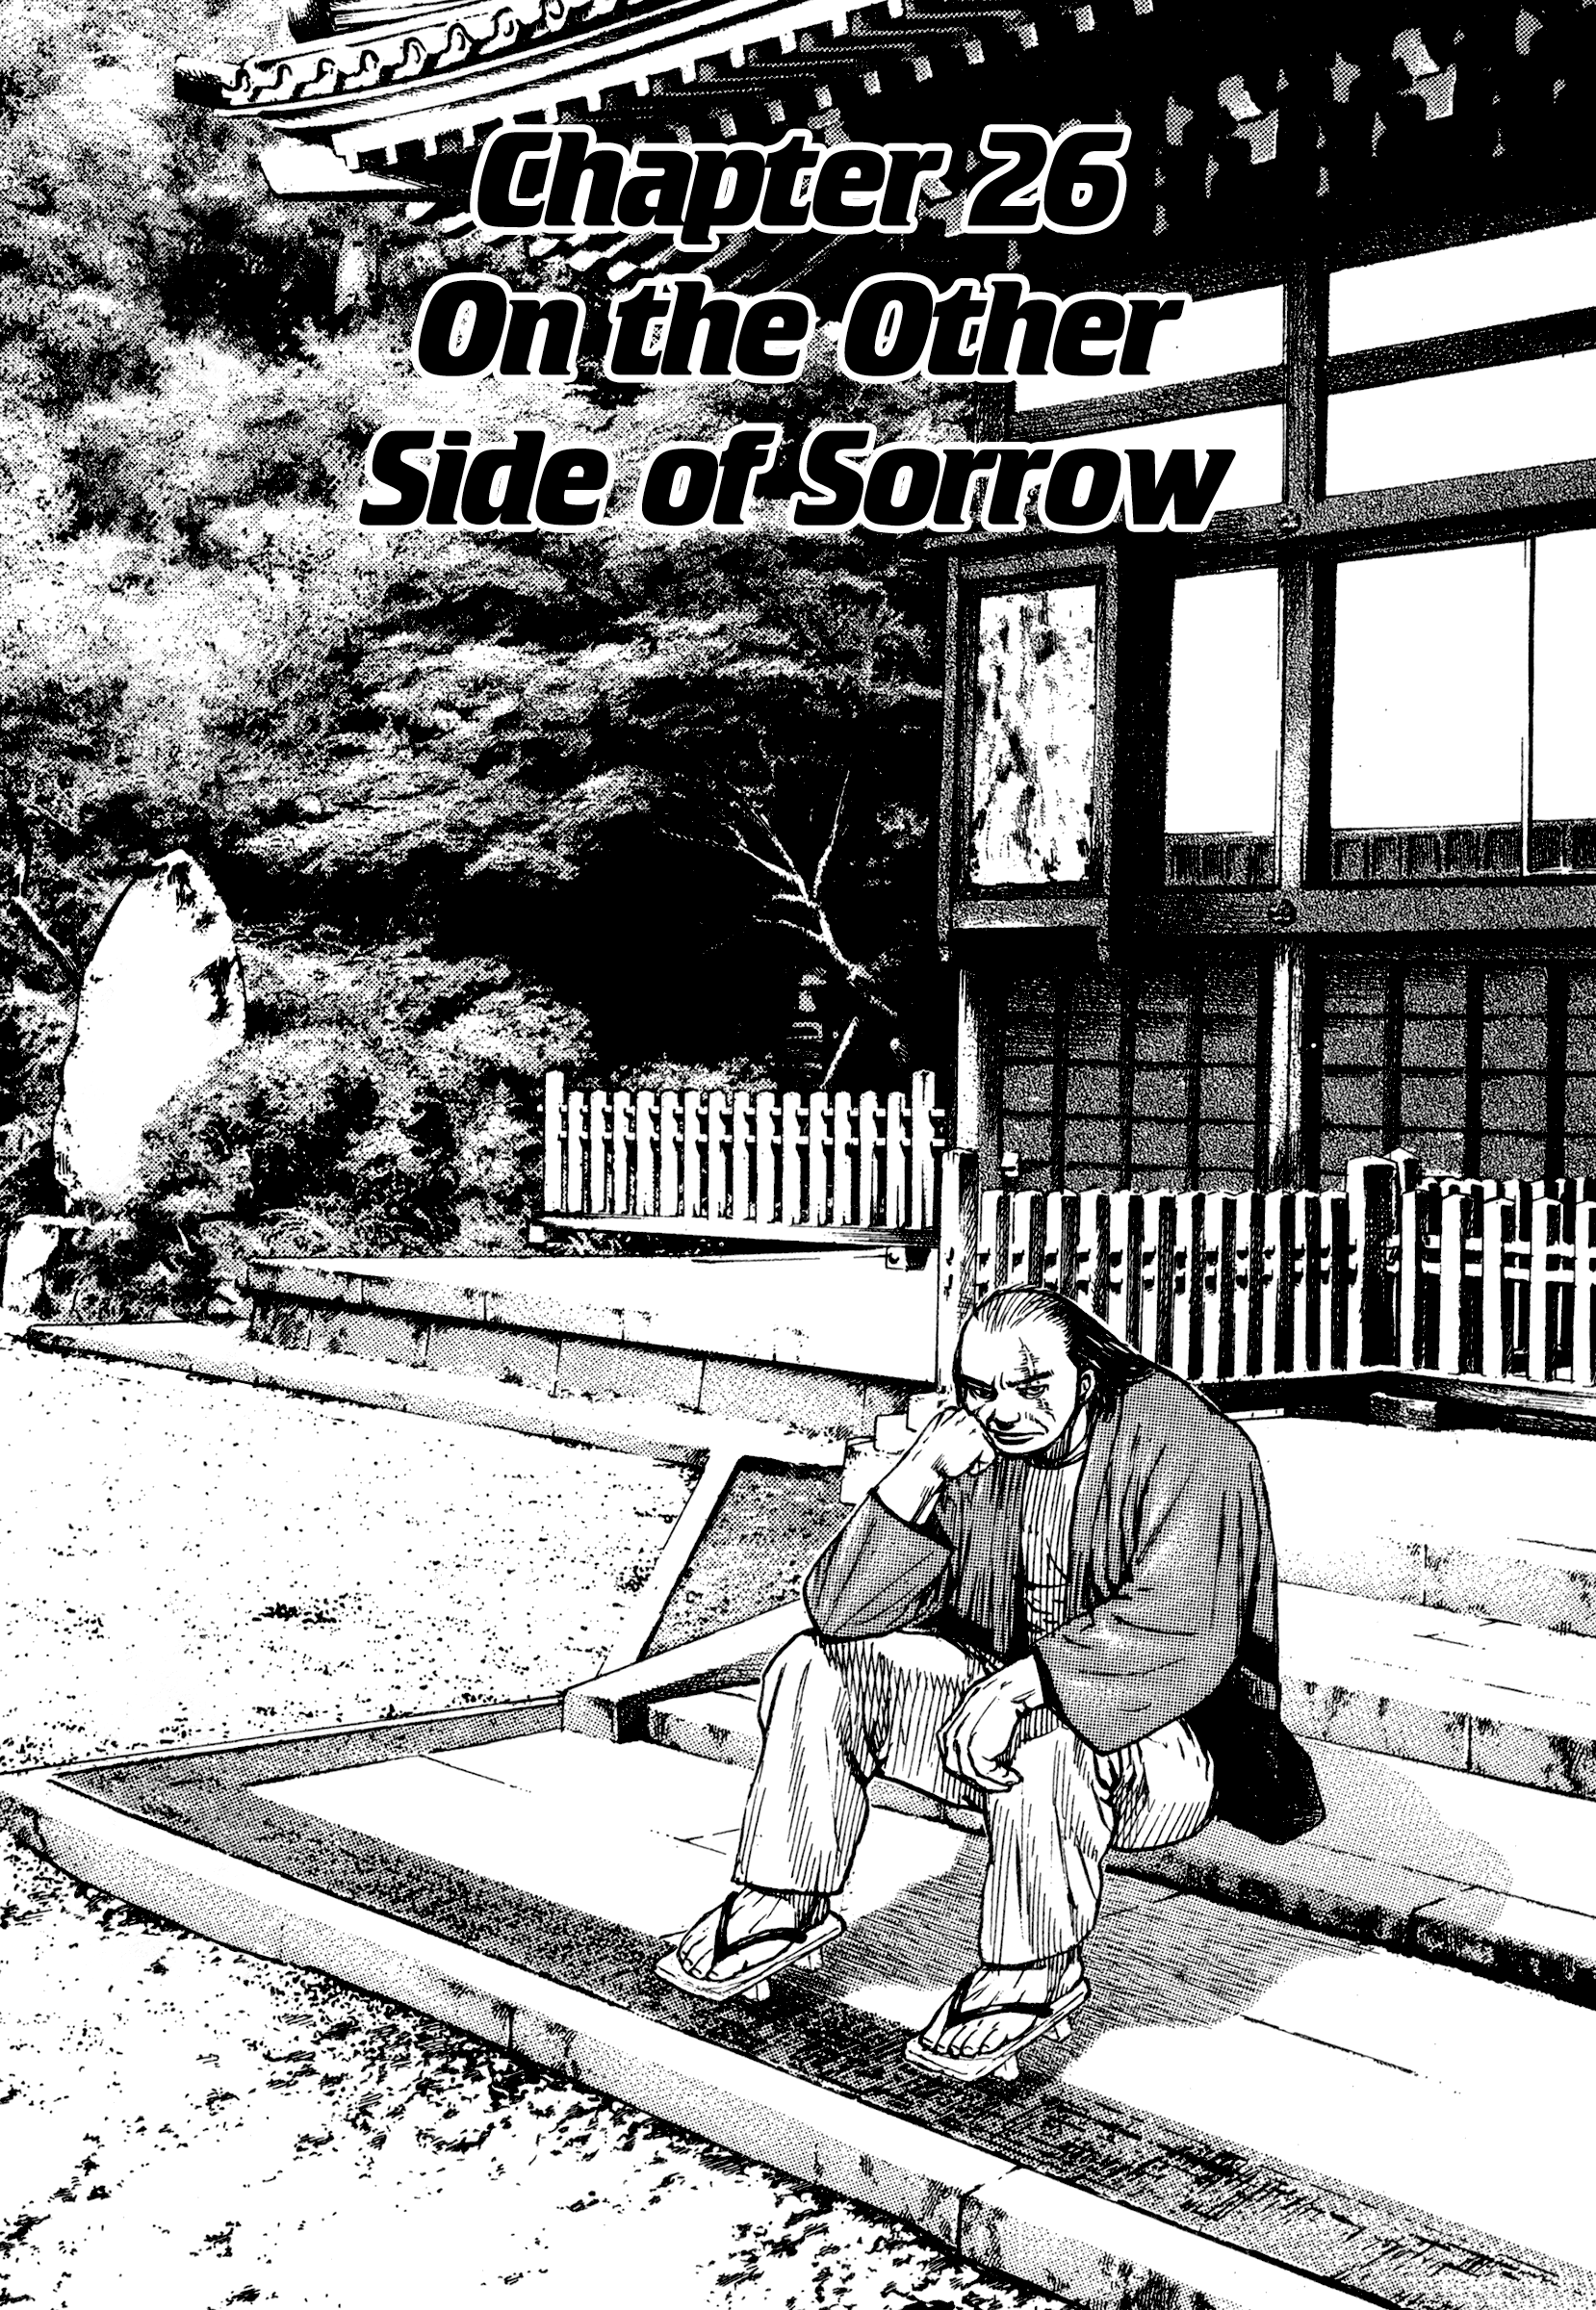 Kizu Darake No Jinsei Vol.4 Chapter 26: On The Other Side Of Sorrow - Picture 1